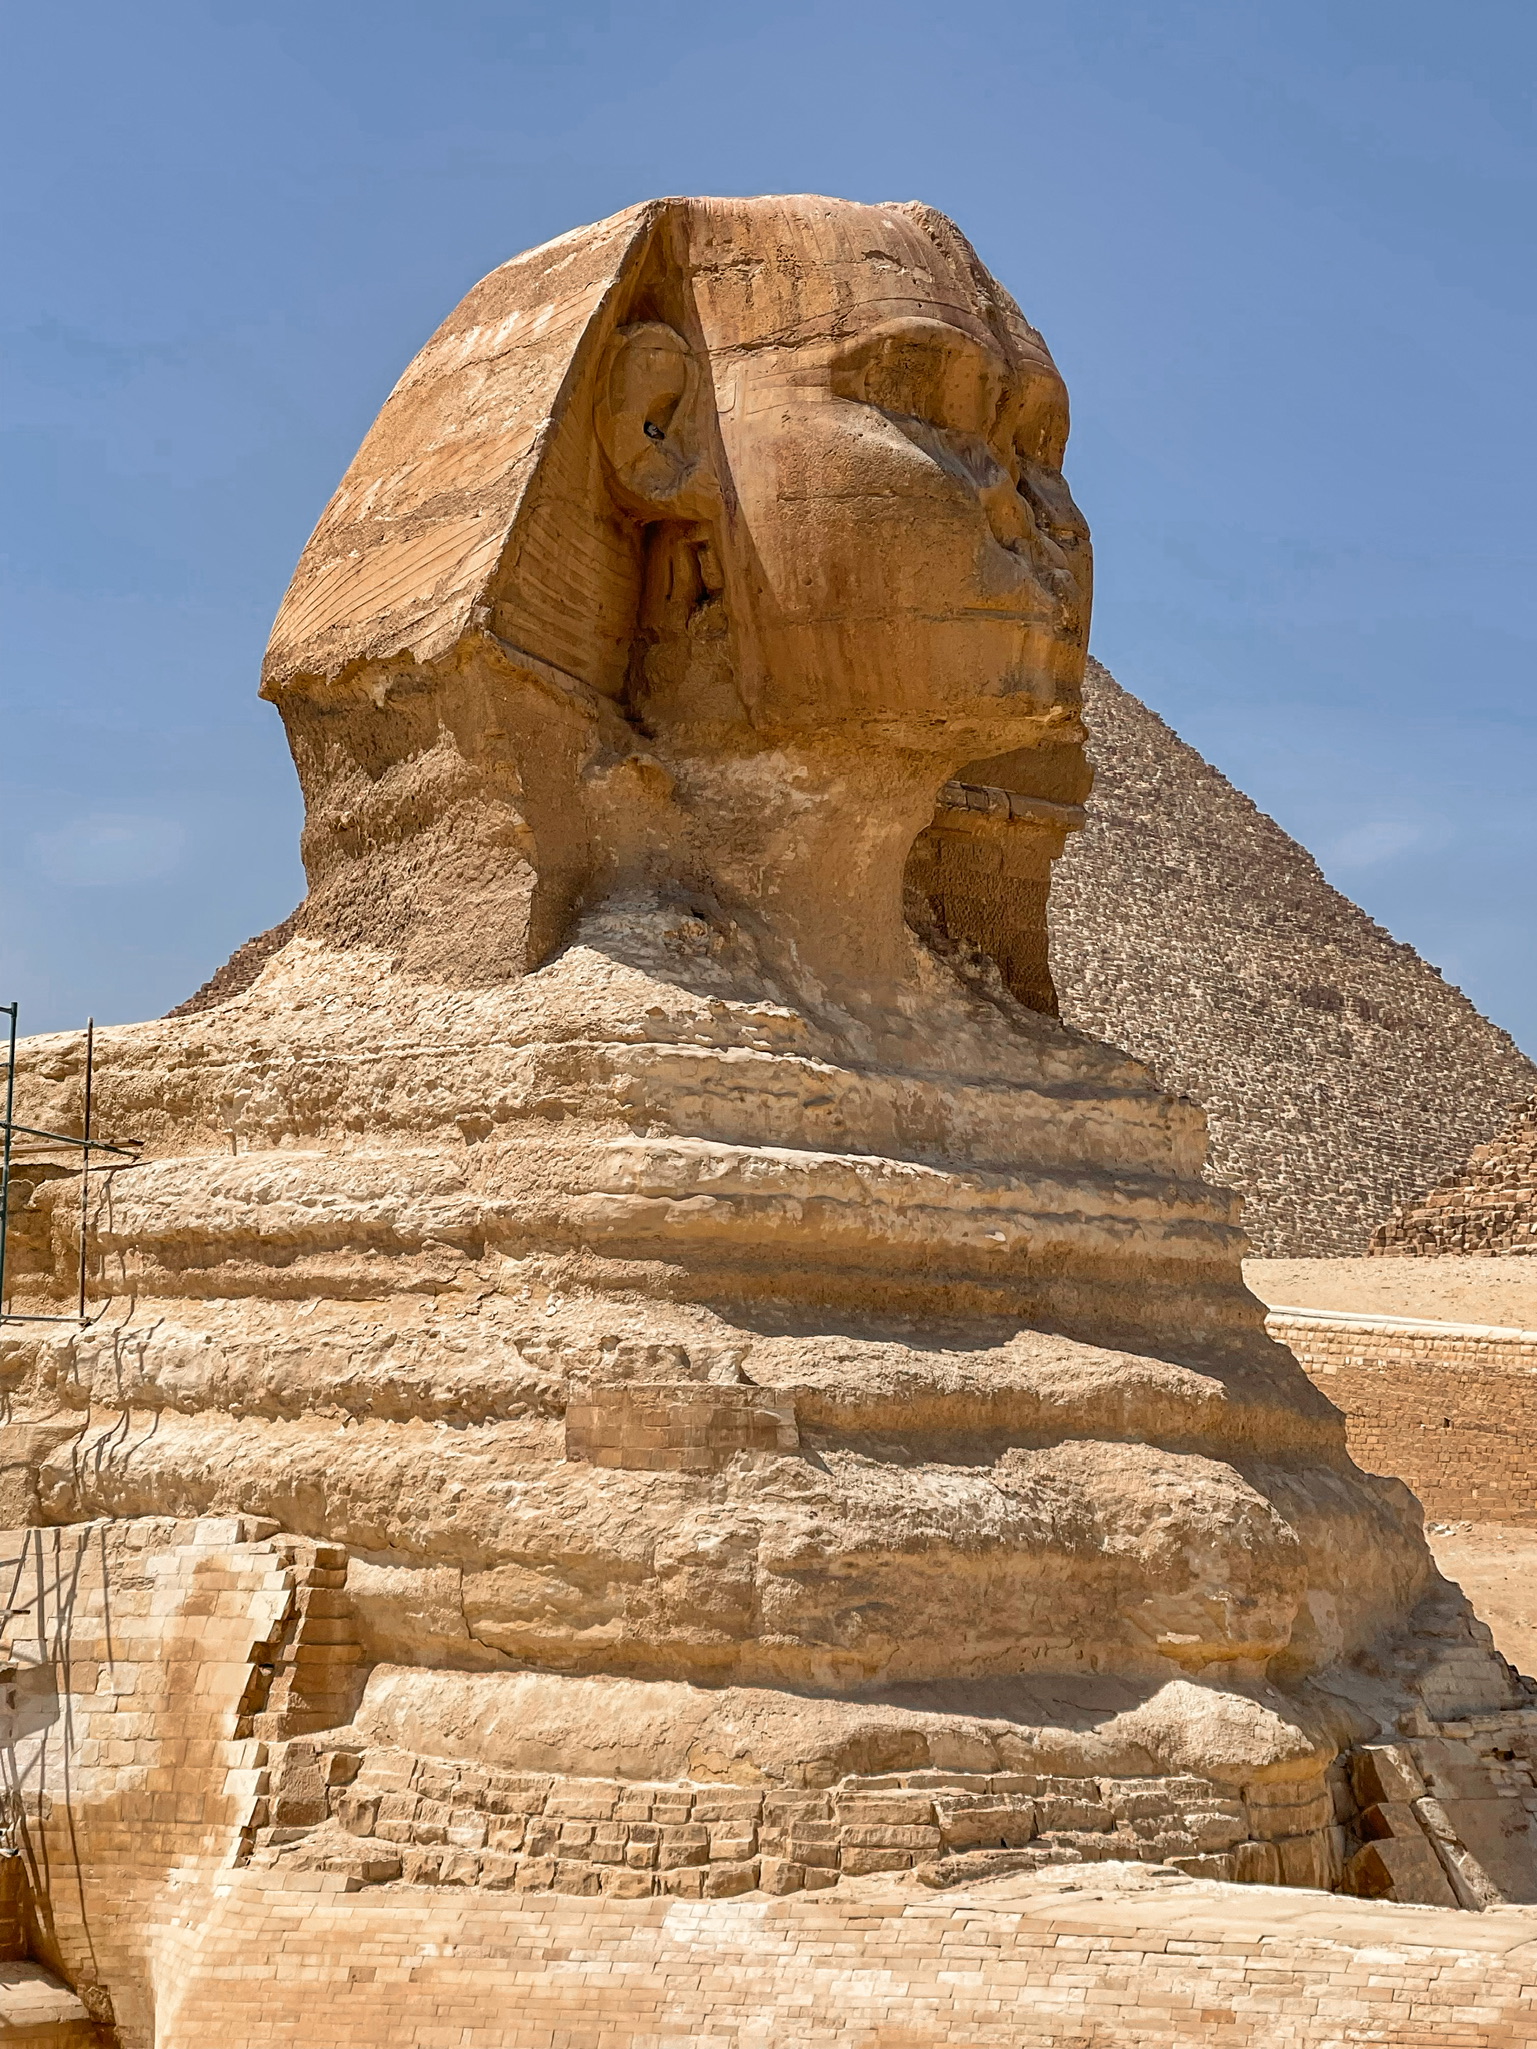 planning a trip to the middle east, where to go in the middle east, how to plan a trip to the middle east, The Great Pyramids of Giza, Egypt, Cairo Egypt, erin busbee, busbee style, busbee family travels, cairo trip, great pyramids of giza trip, sphinx in egypt